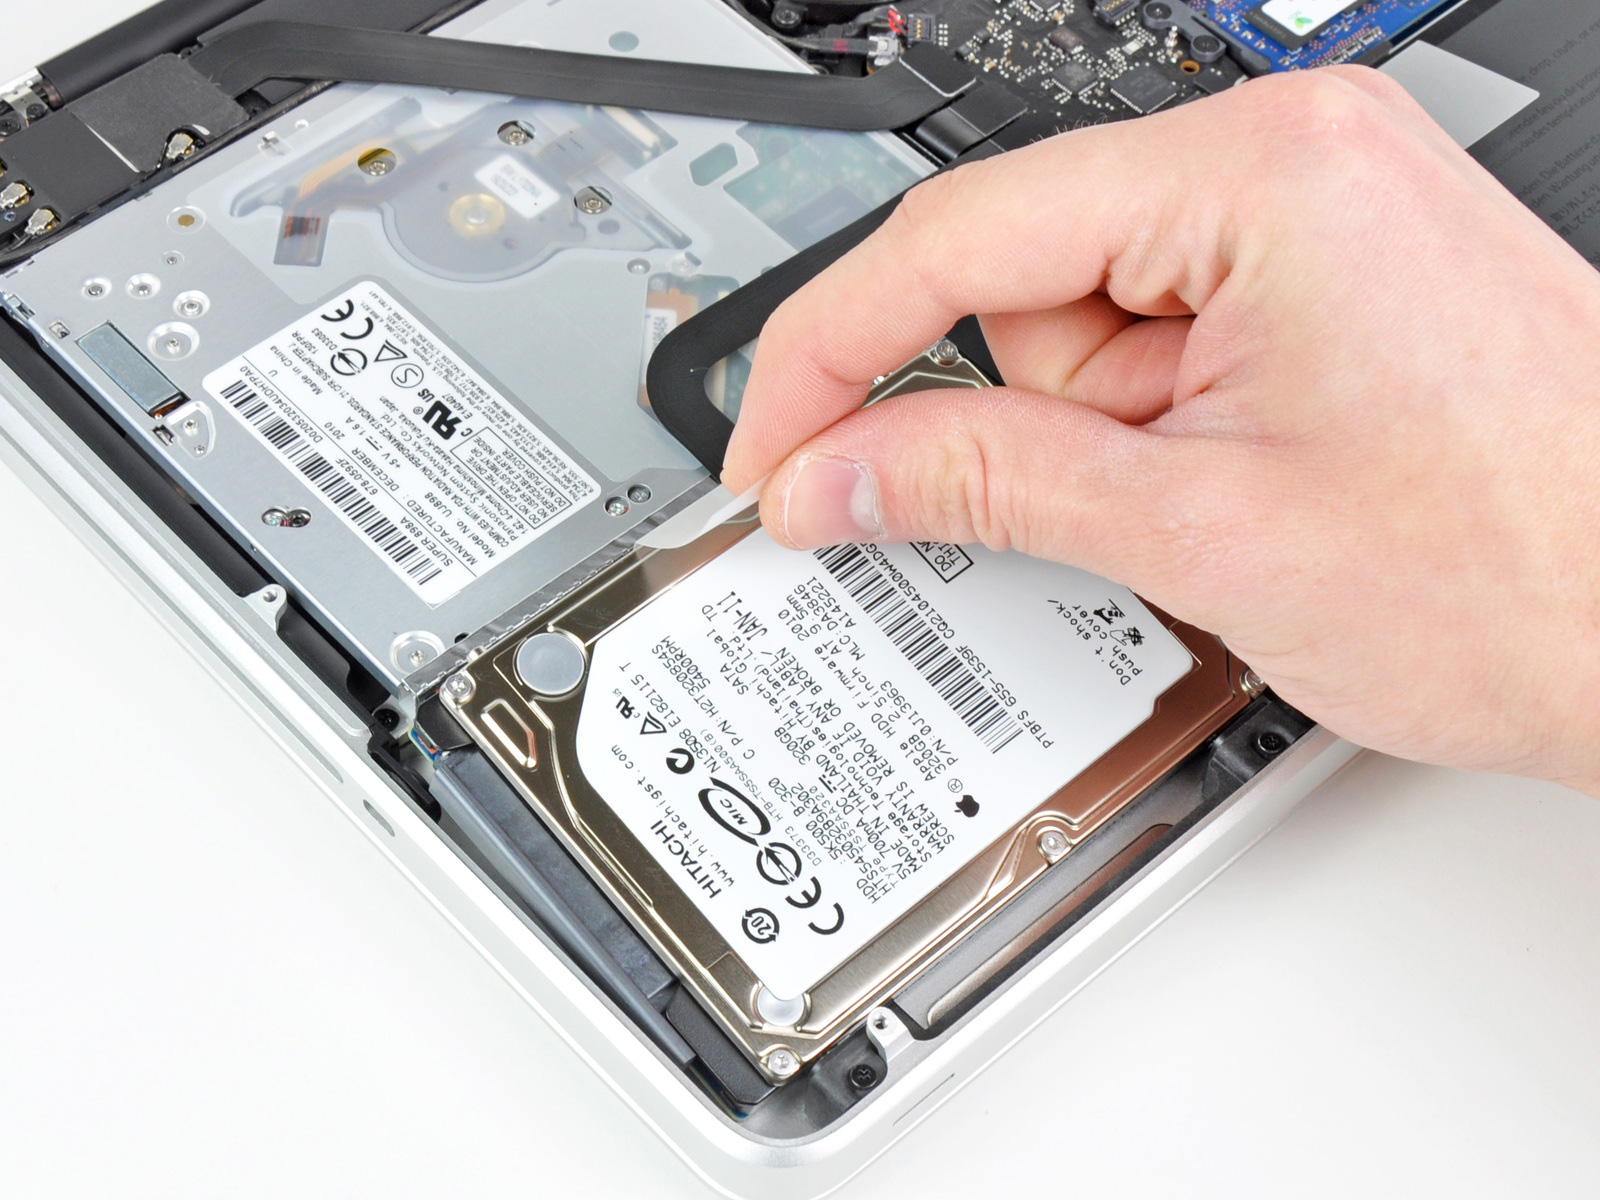 How to open disk drive on macbook